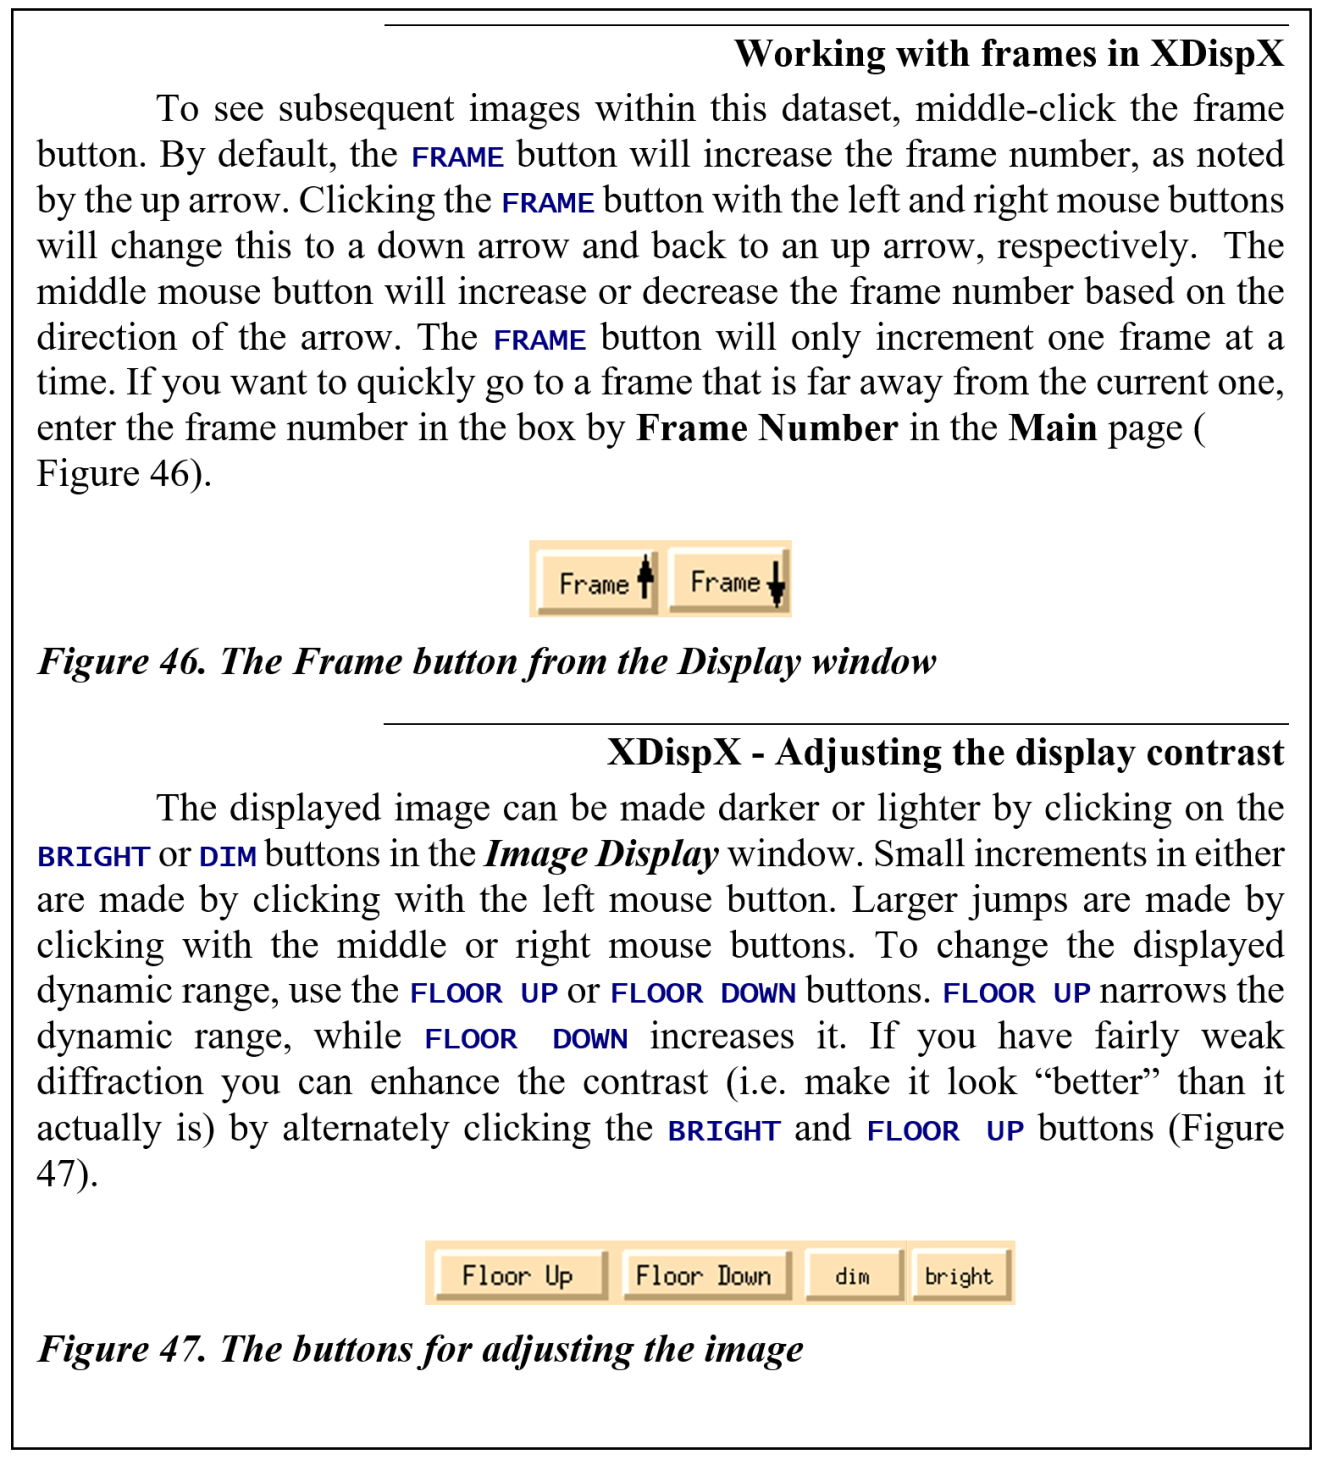 Working with frames in XDispX 
To see subsequent images within this dataset, middle-click the frame button. By default, the FRAME button will increase the frame number, as noted by the up arrow. Clicking the FRAME button with the left and right mouse buttons will change this to a down arrow and back to an up arrow, respectively.  The middle mouse button will increase or decrease the frame number based on the direction of the arrow. The FRAME button will only increment one frame at a time. If you want to quickly go to a frame that is far away from the current one, enter the frame number in the box by Frame Number in the Main page (
Figure 46).

  
Figure 46. The Frame button from the Display window
XDispX - Adjusting the display contrast
The displayed image can be made darker or lighter by clicking on the BRIGHT or DIM buttons in the Image Display window. Small increments in either are made by clicking with the left mouse button. Larger jumps are made by clicking with the middle or right mouse buttons. To change the displayed dynamic range, use the FLOOR UP or FLOOR DOWN buttons. FLOOR UP narrows the dynamic range, while FLOOR DOWN increases it. If you have fairly weak diffraction you can enhance the contrast (i.e. make it look 